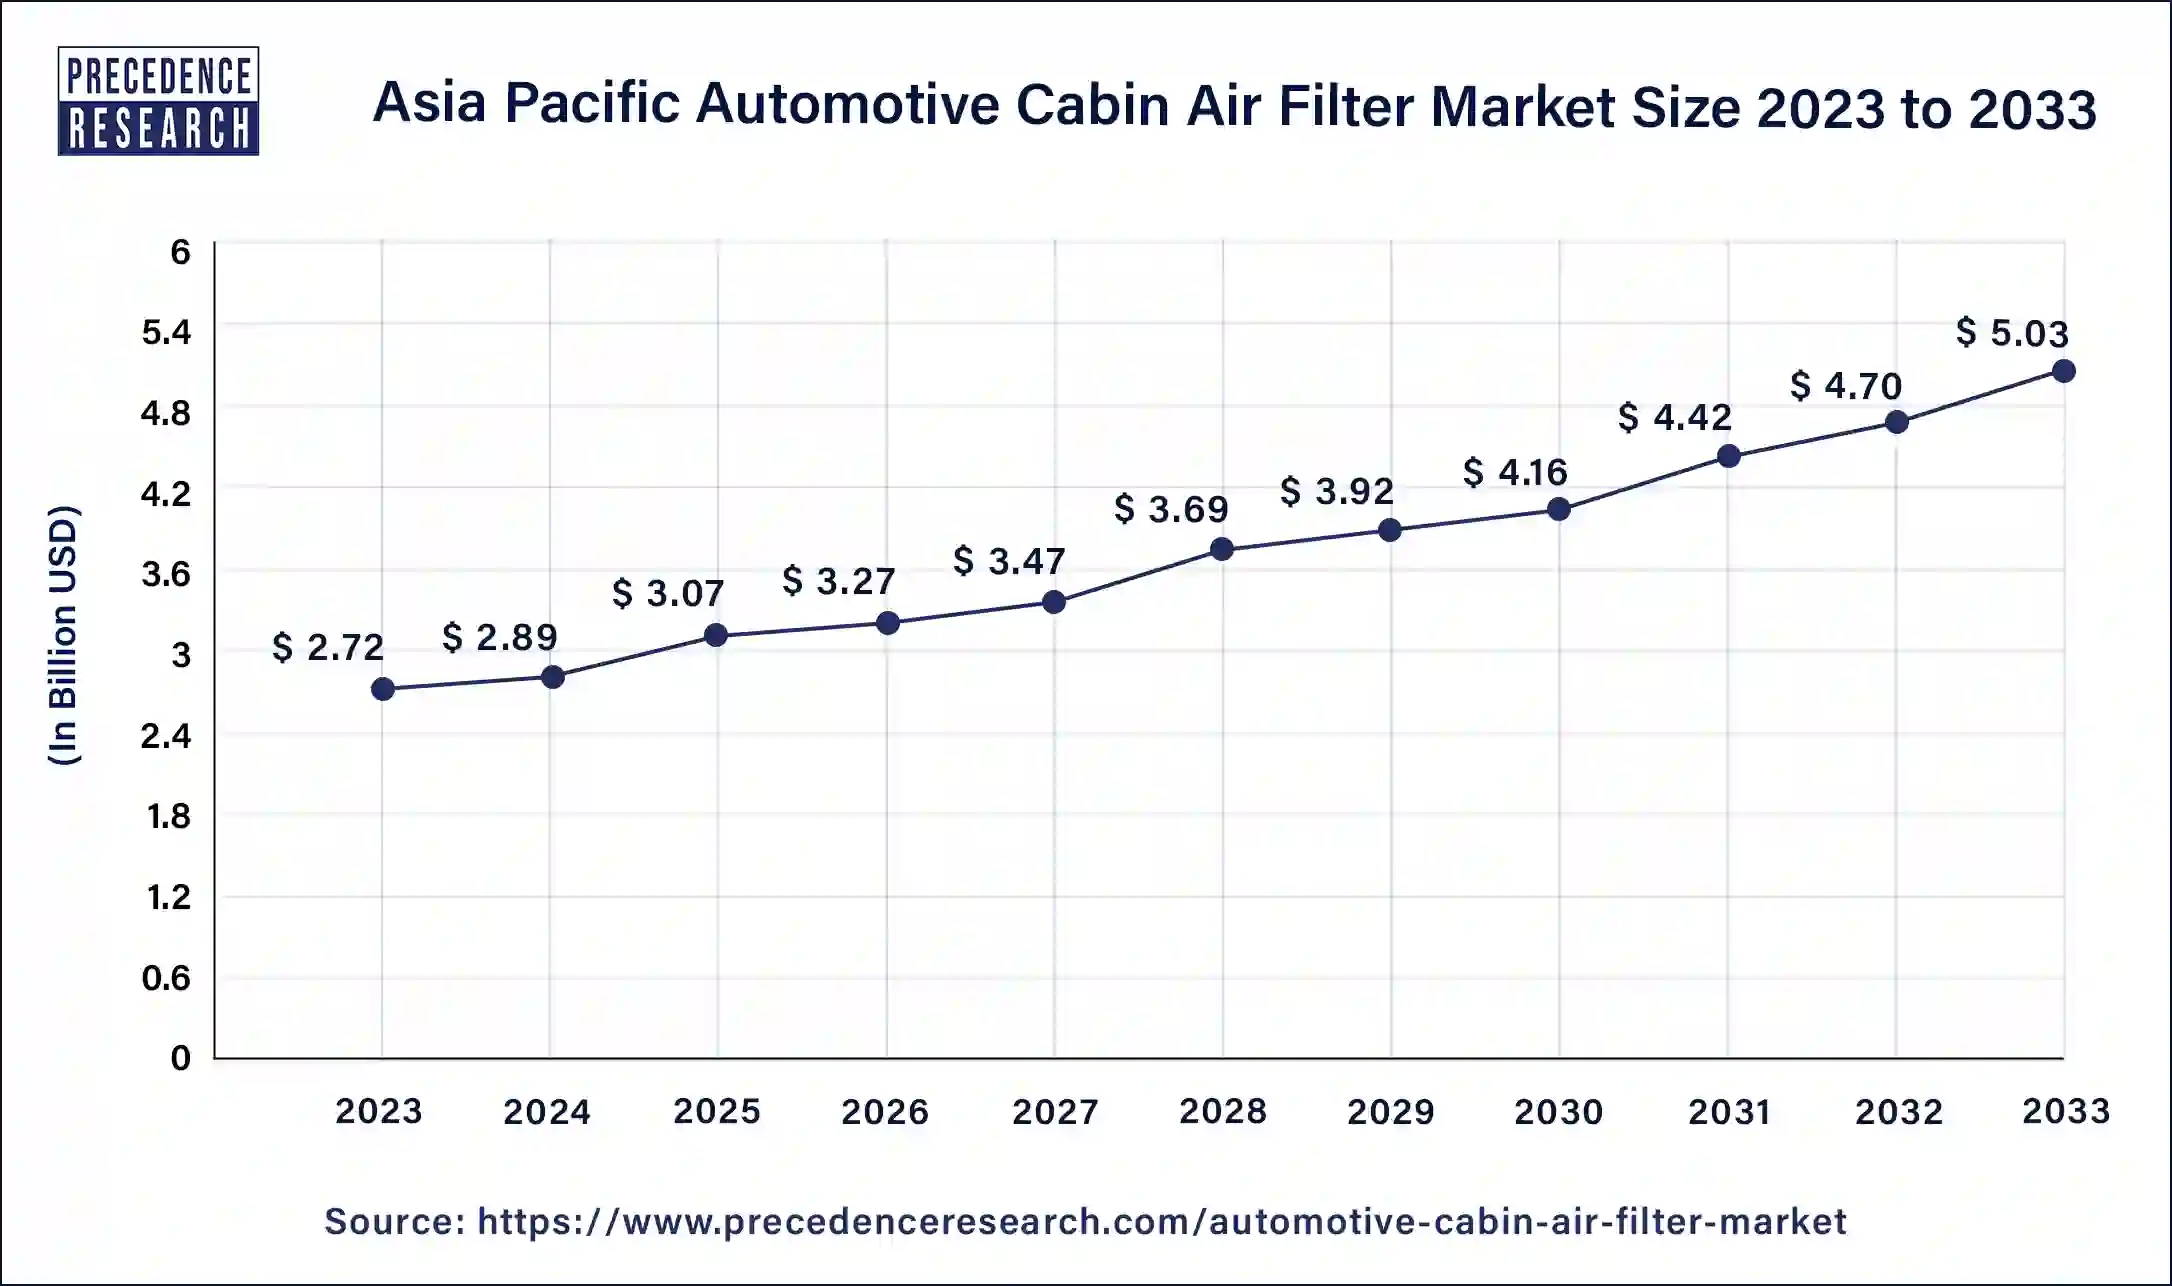 Asia pacific Automotive Cabin Air Filter Market Size 2024 to 2033